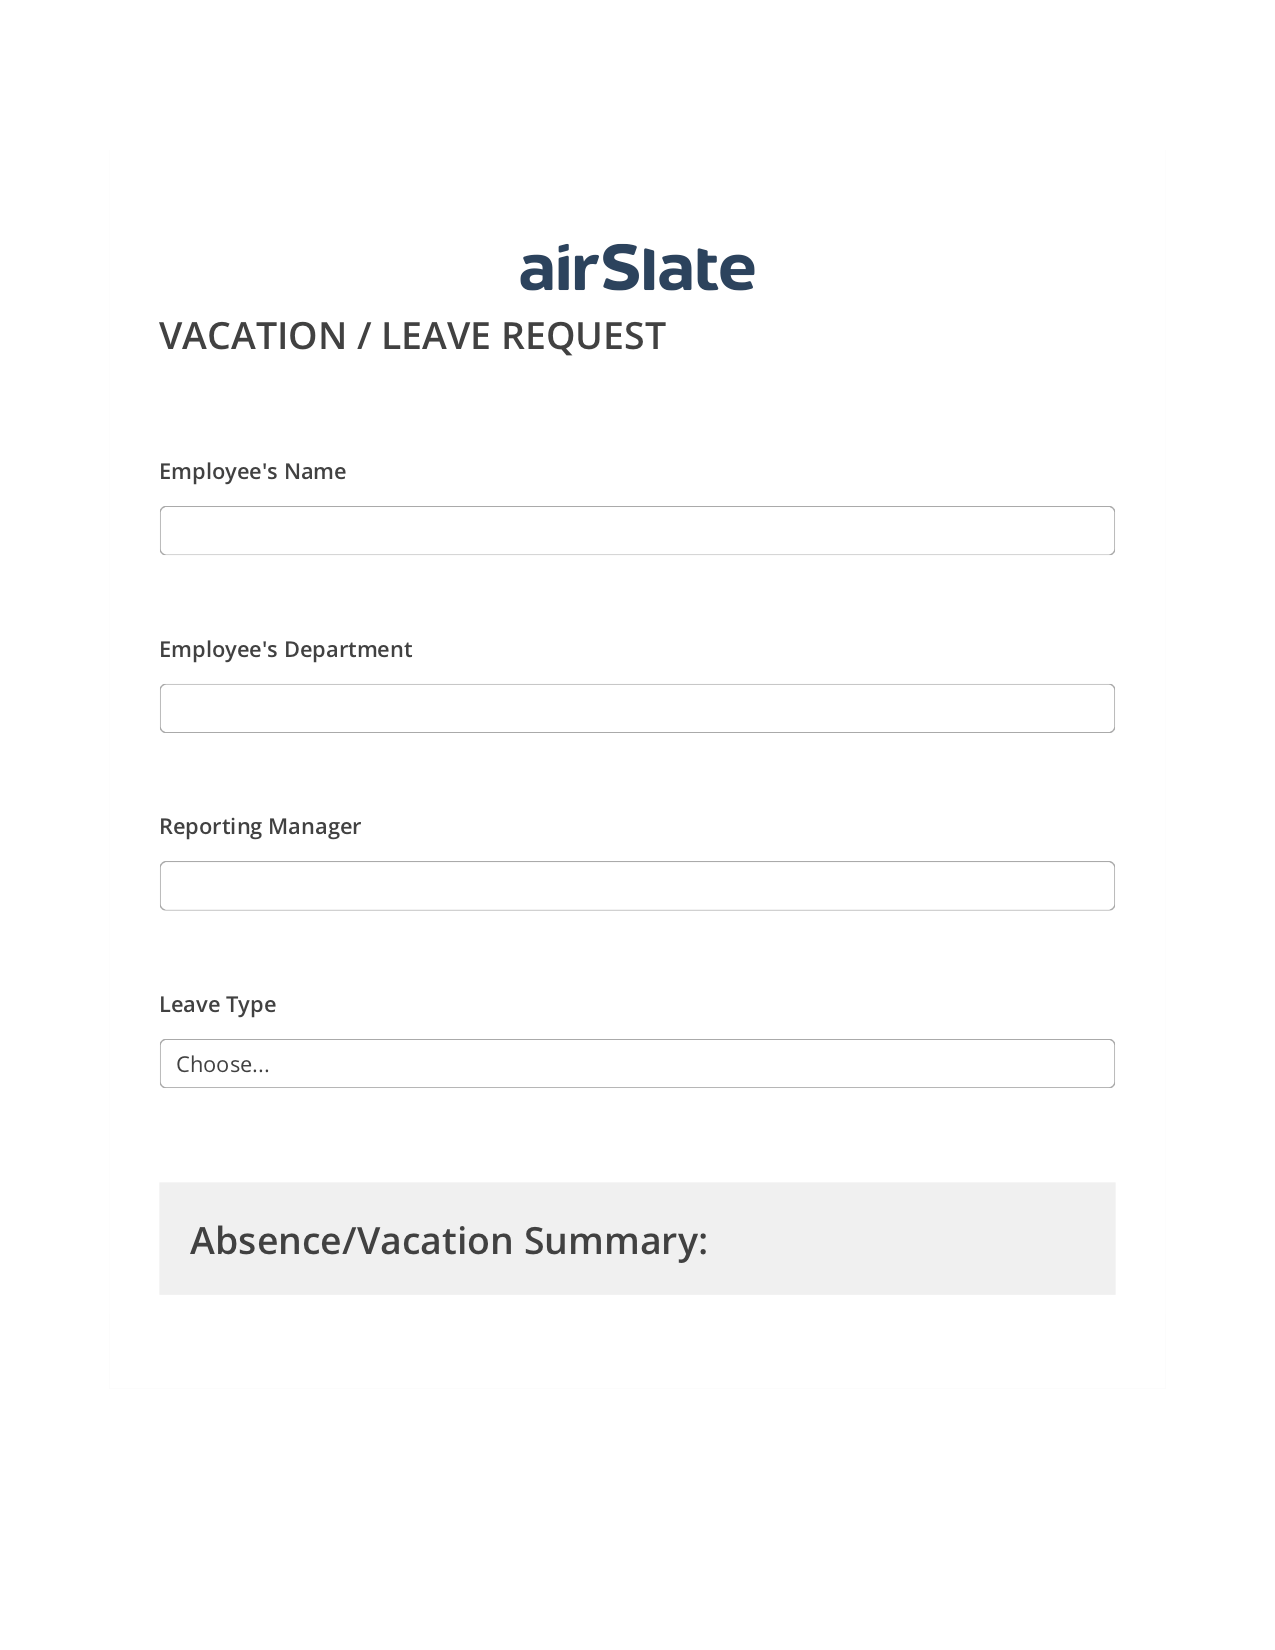 Vacation/Leave Request Workflow Pre-fill from CSV File Bot, Send a Slate to MS Dynamics 365 Contact Bot, Archive to Box Bot